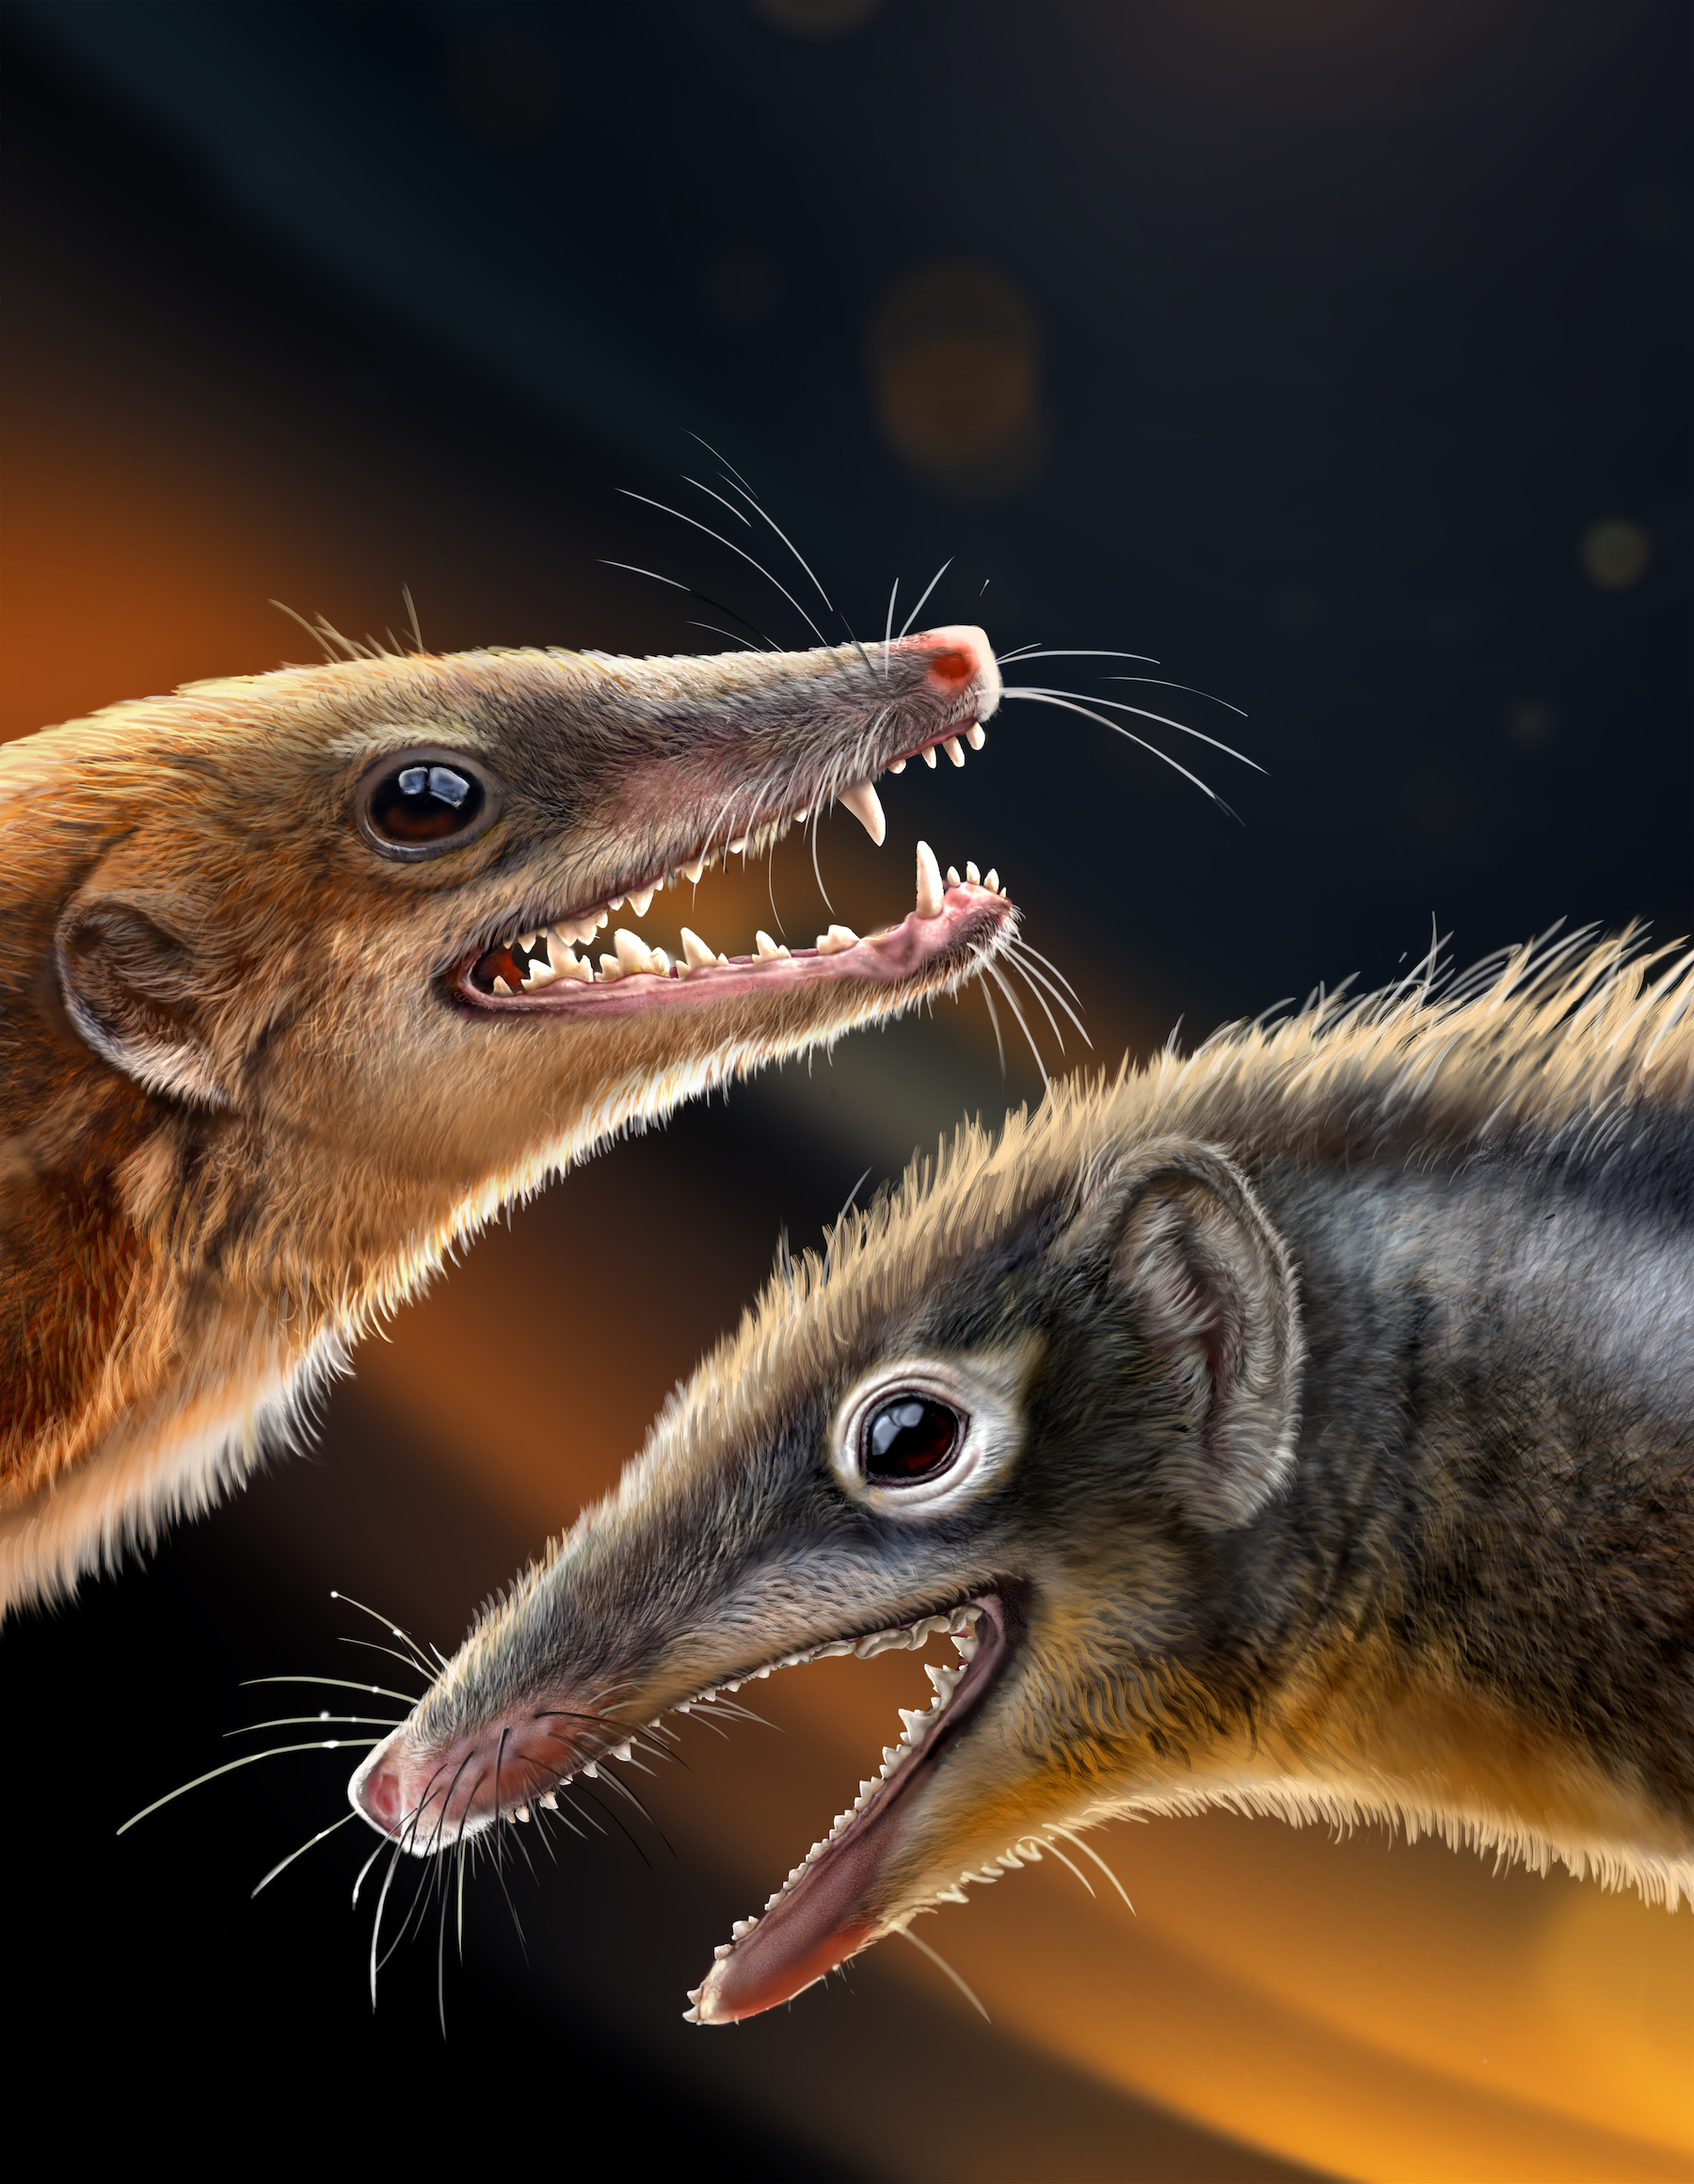 Reconstruction of Feredocodon chowi (right) and Dianoconodon youngi (left)

CREDIT
© Chuang Zhao

